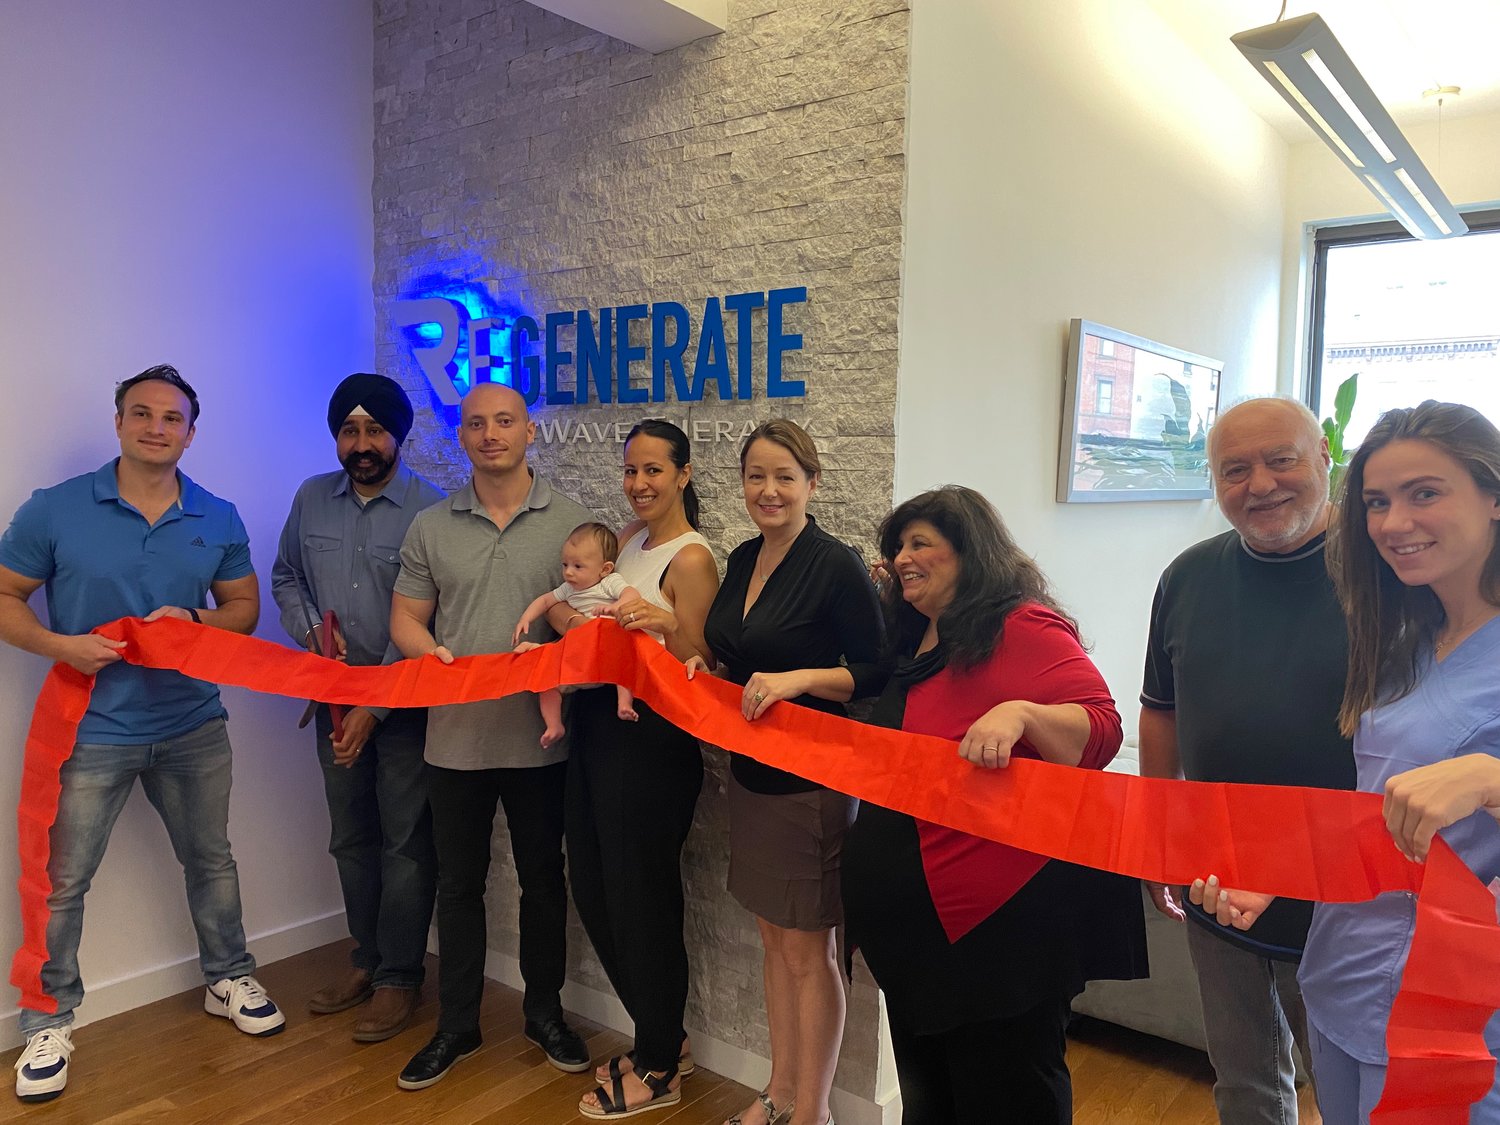 Regenerate SoftWave Therapy hosted a festive Open House in Hoboken on Tuesday, June 22. On hand to celebrate were, from left to right: Co-founder Dr. Marco Ferrucci, Hoboken Mayor Ravi S. Bhalla, Co-Founder Dr. Tim Lyons, Lorenzo Lyons, Lisa Lyons, Hoboken Council Member Tiffanie Fisher, Doreen Dalli, Joe Montelone, and Erin Robinson.